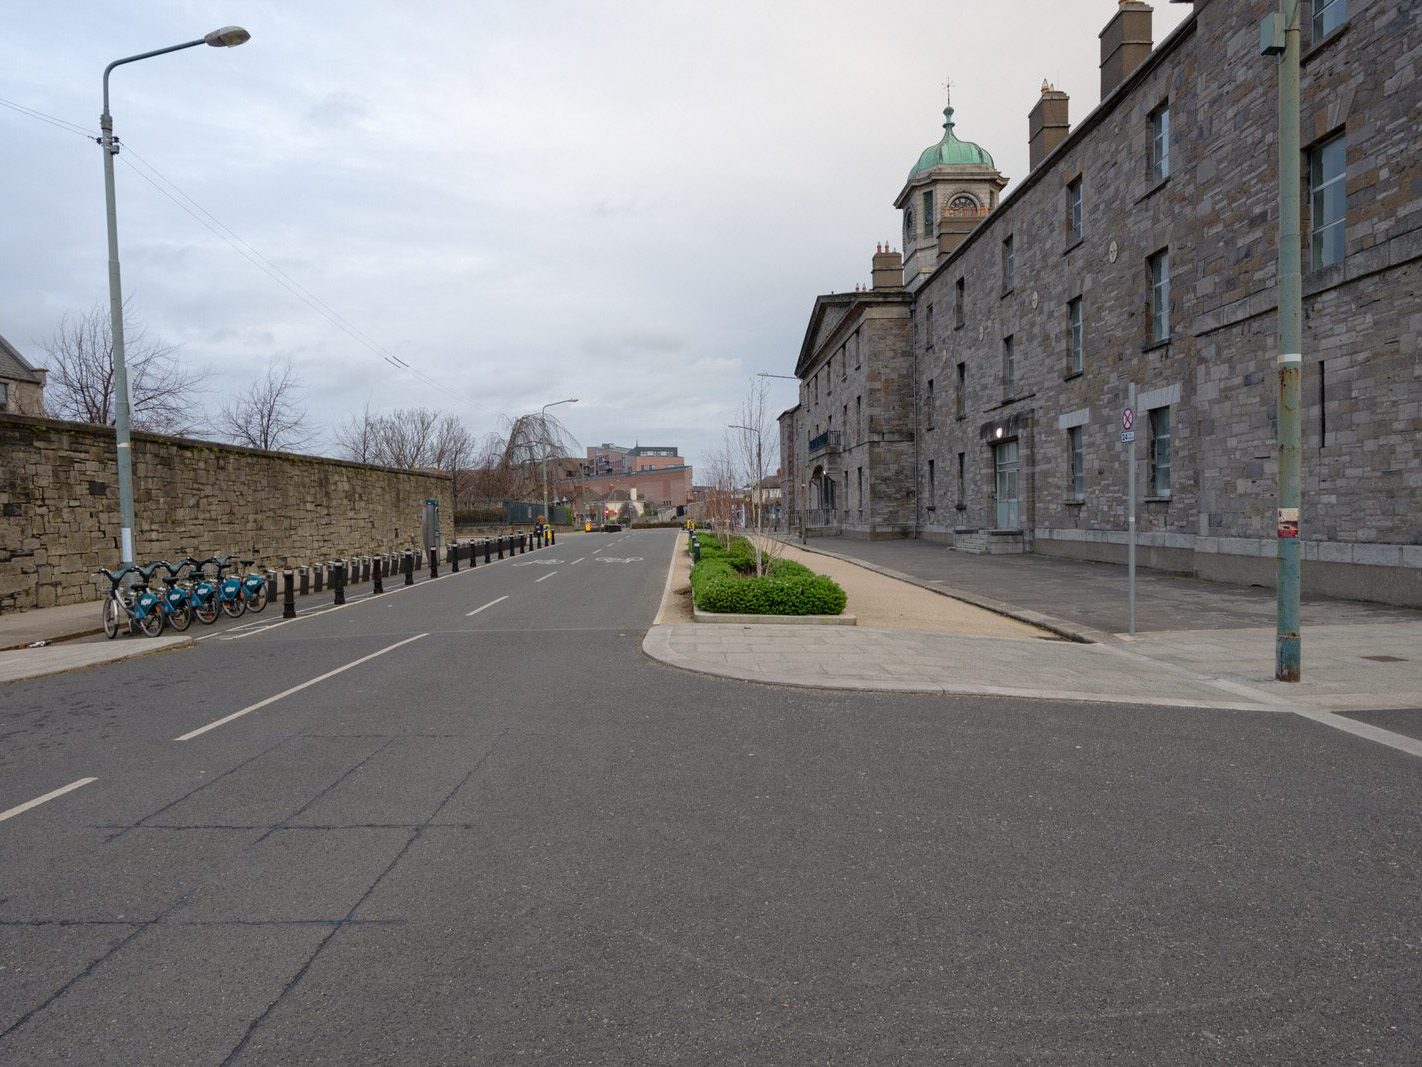 I VISITED THE GRANGEGORMAN UNIVERSITY CAMPUS [THERE WAS NO SIGN OF CHRISTMAS CELEBRATIONS THERE]-226041-1